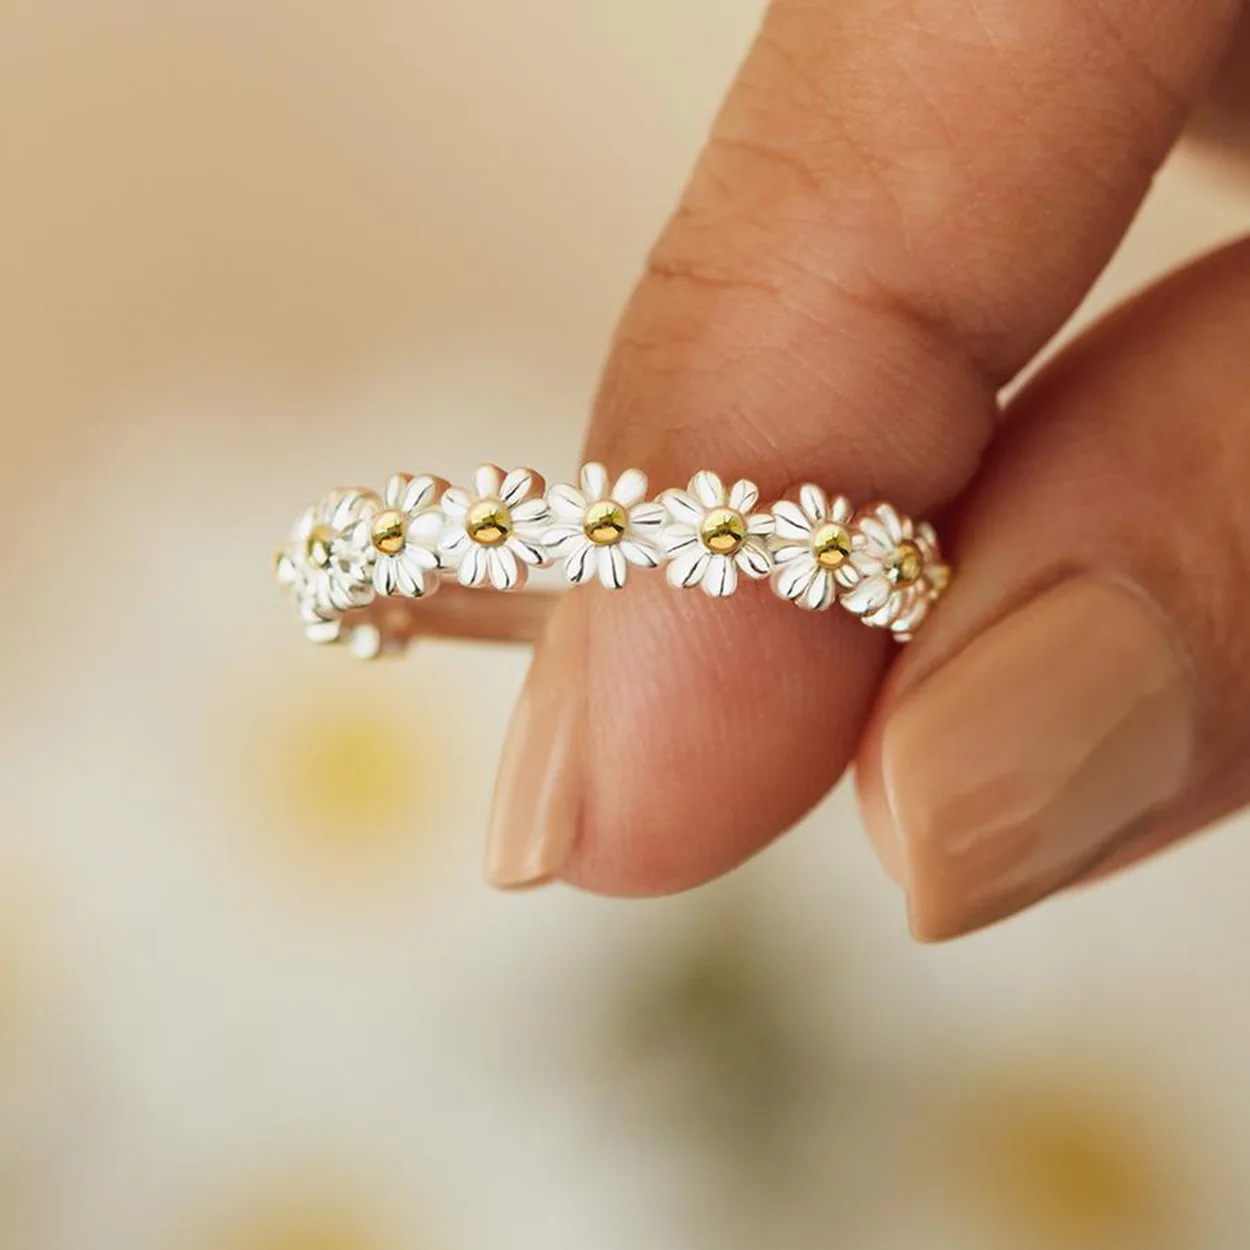 

17KM Exquisite Daisy Flower Rings Adjustable Opening Ring Wedding Engagement Rings for women girls, Gold